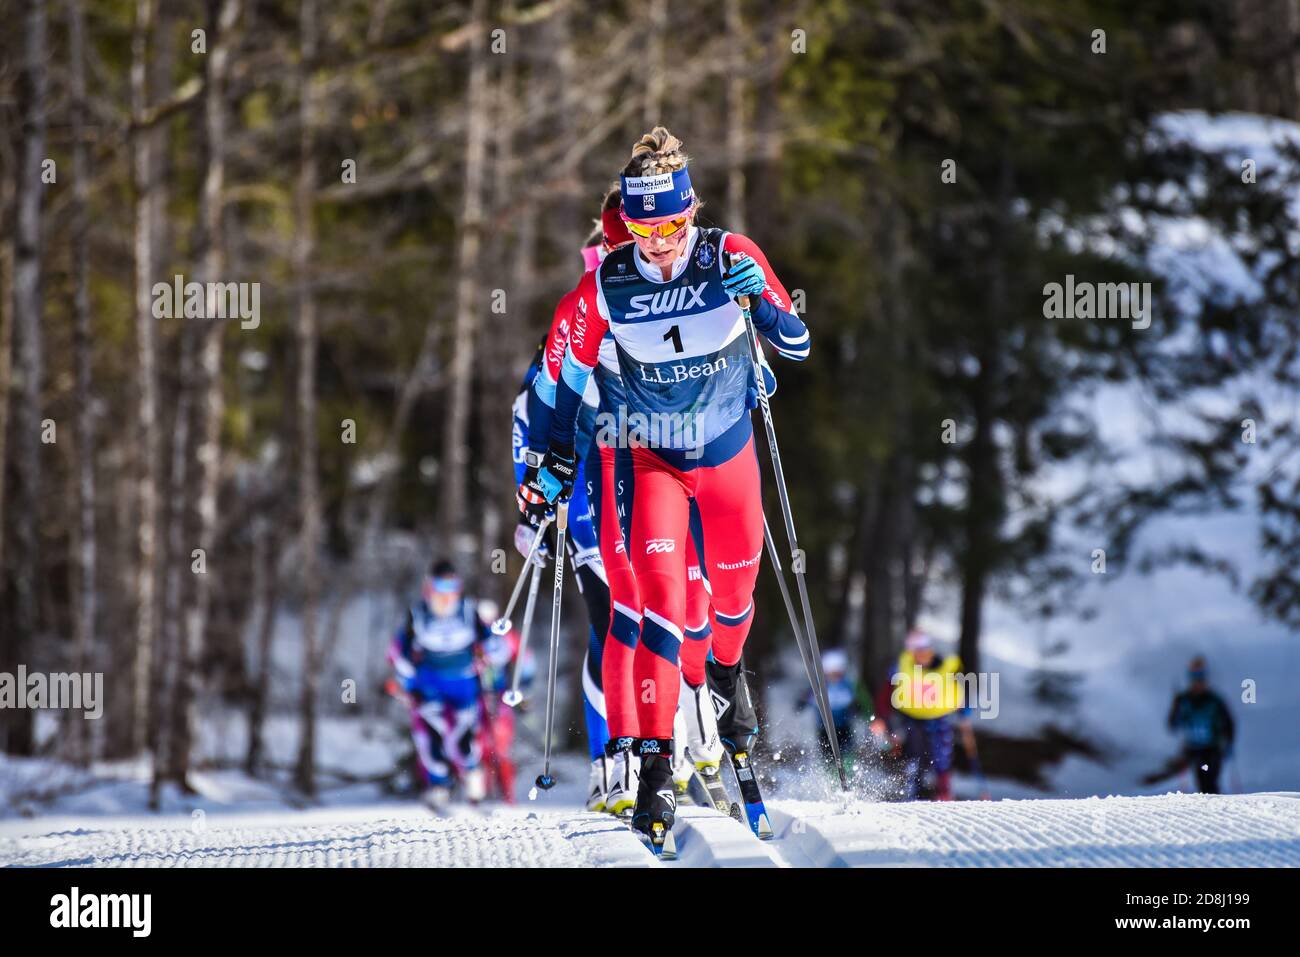 US Ski Team member Jessie Diggins leads during the 30-kilometer classic race in the 2018 Super Tour Finals, Craftsbury, Vermont, USA Stock Photo